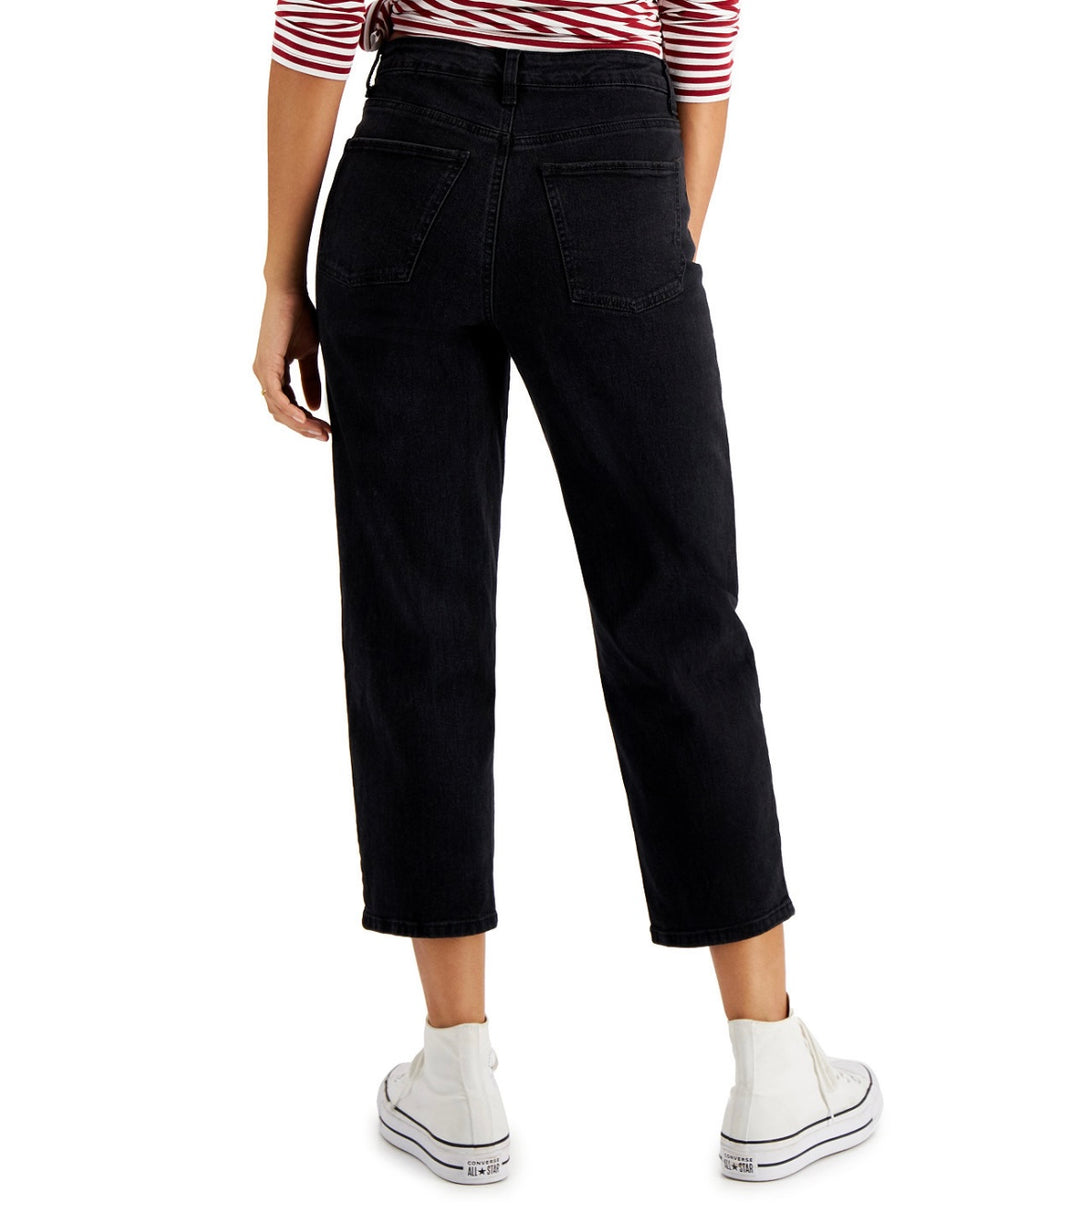 Style & Co. Women's Petite High-Rise Vintage-Classic Mom Jeans Washed Black